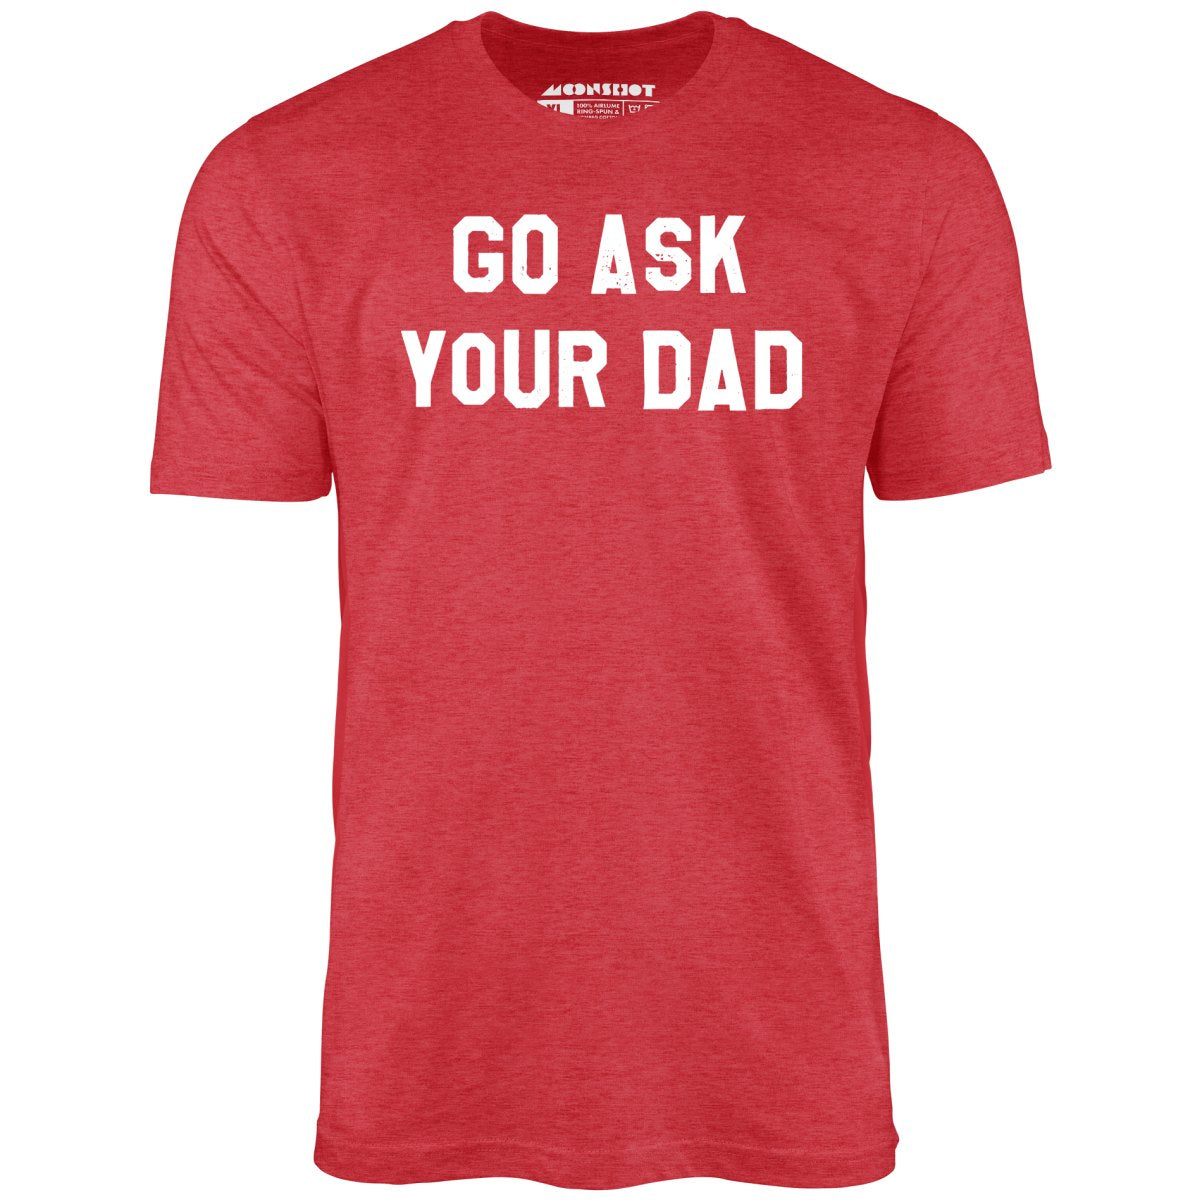 Go Ask Your Dad - Unisex T-Shirt